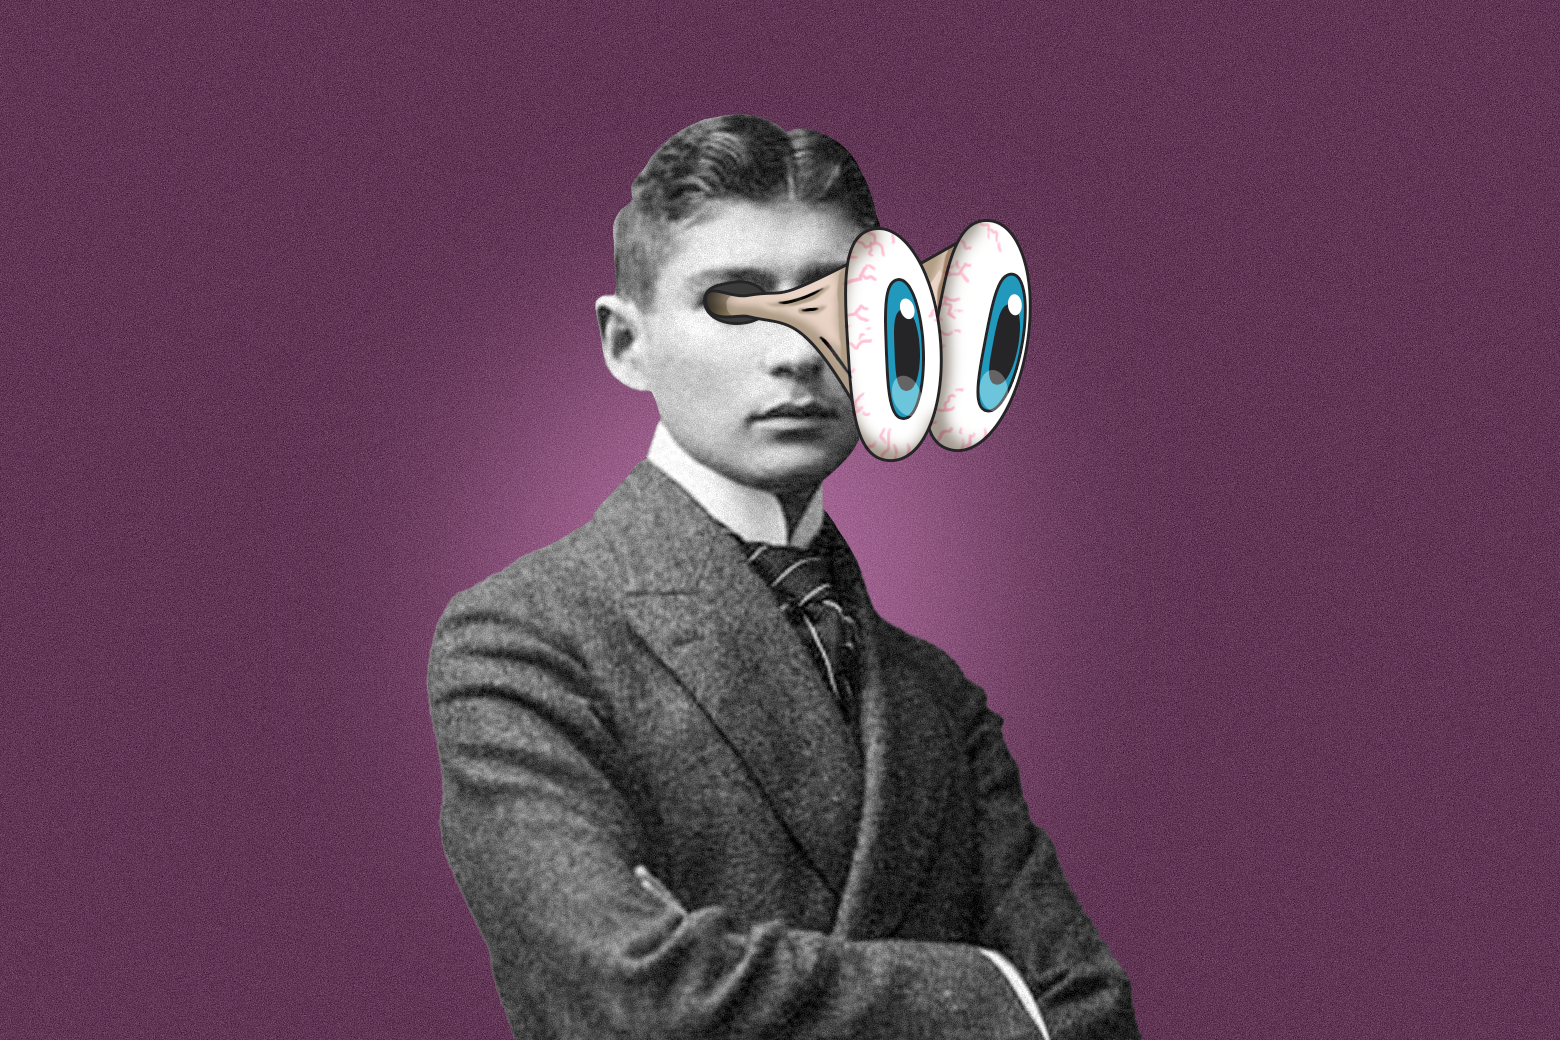 Franz Kafka, but his eyes are popping out like a cartoon wolf.